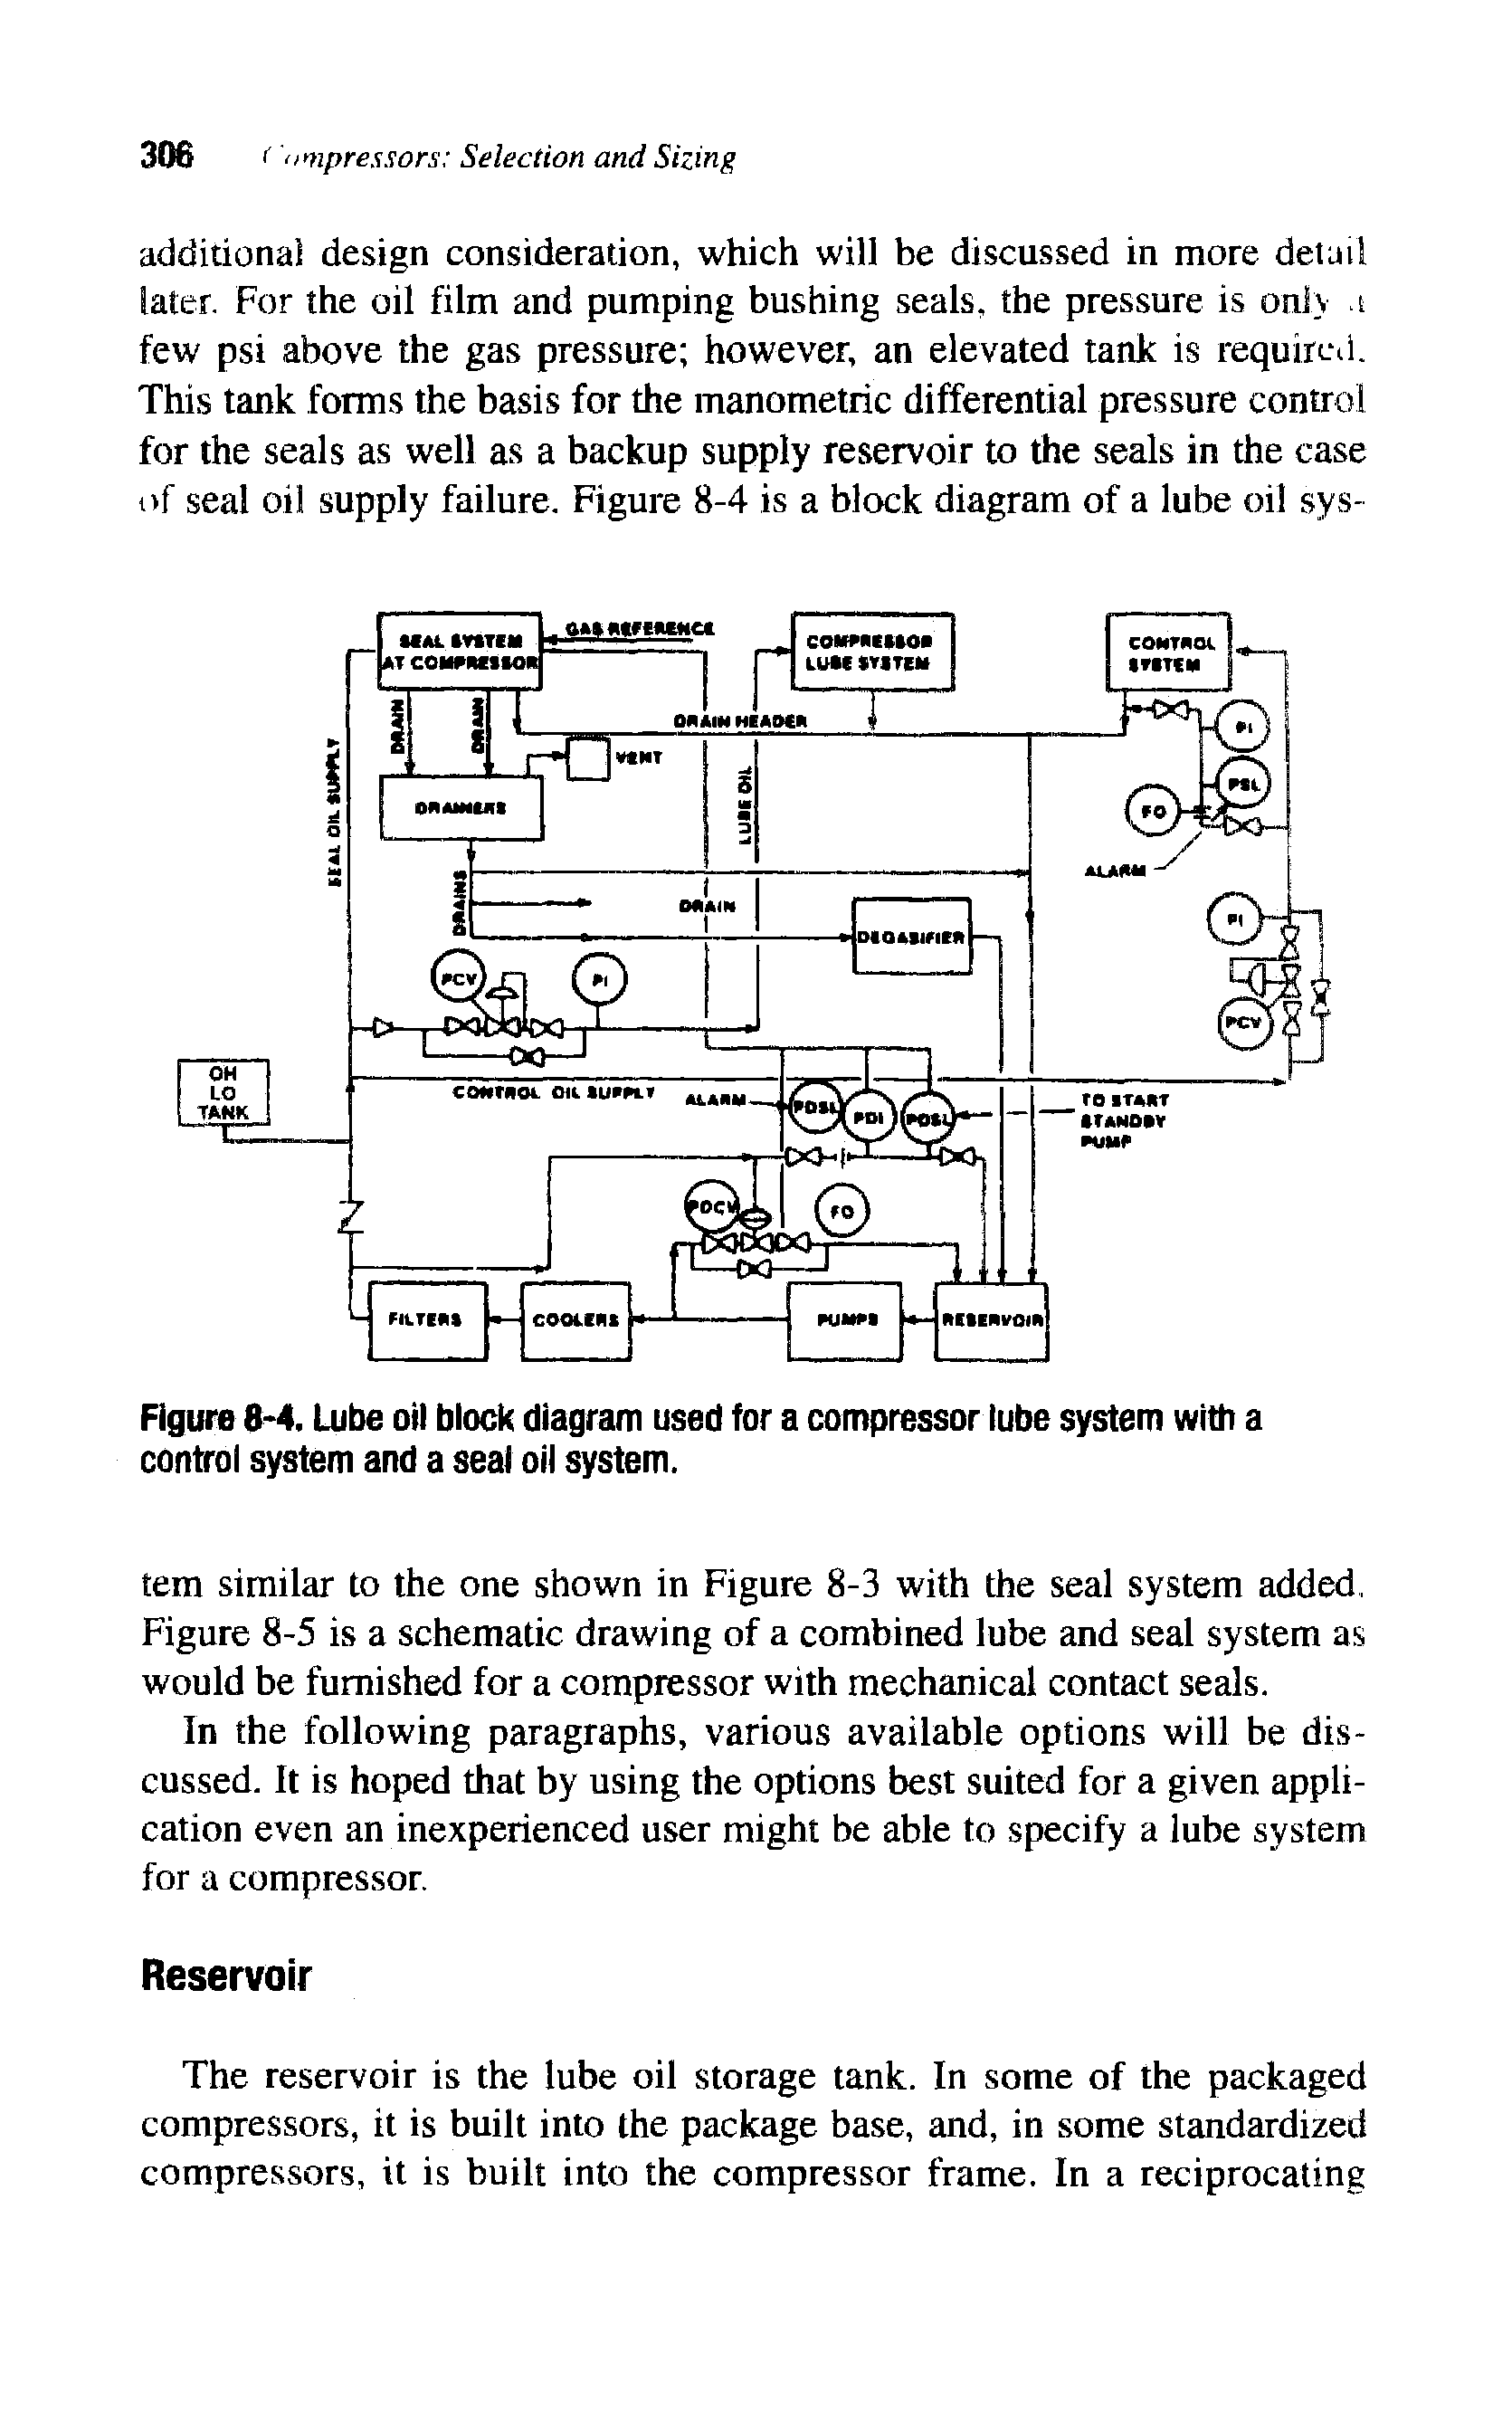 Figure 8 4. Lube oil block diagram used for a compressor lube system with a control system and a seal oil system.